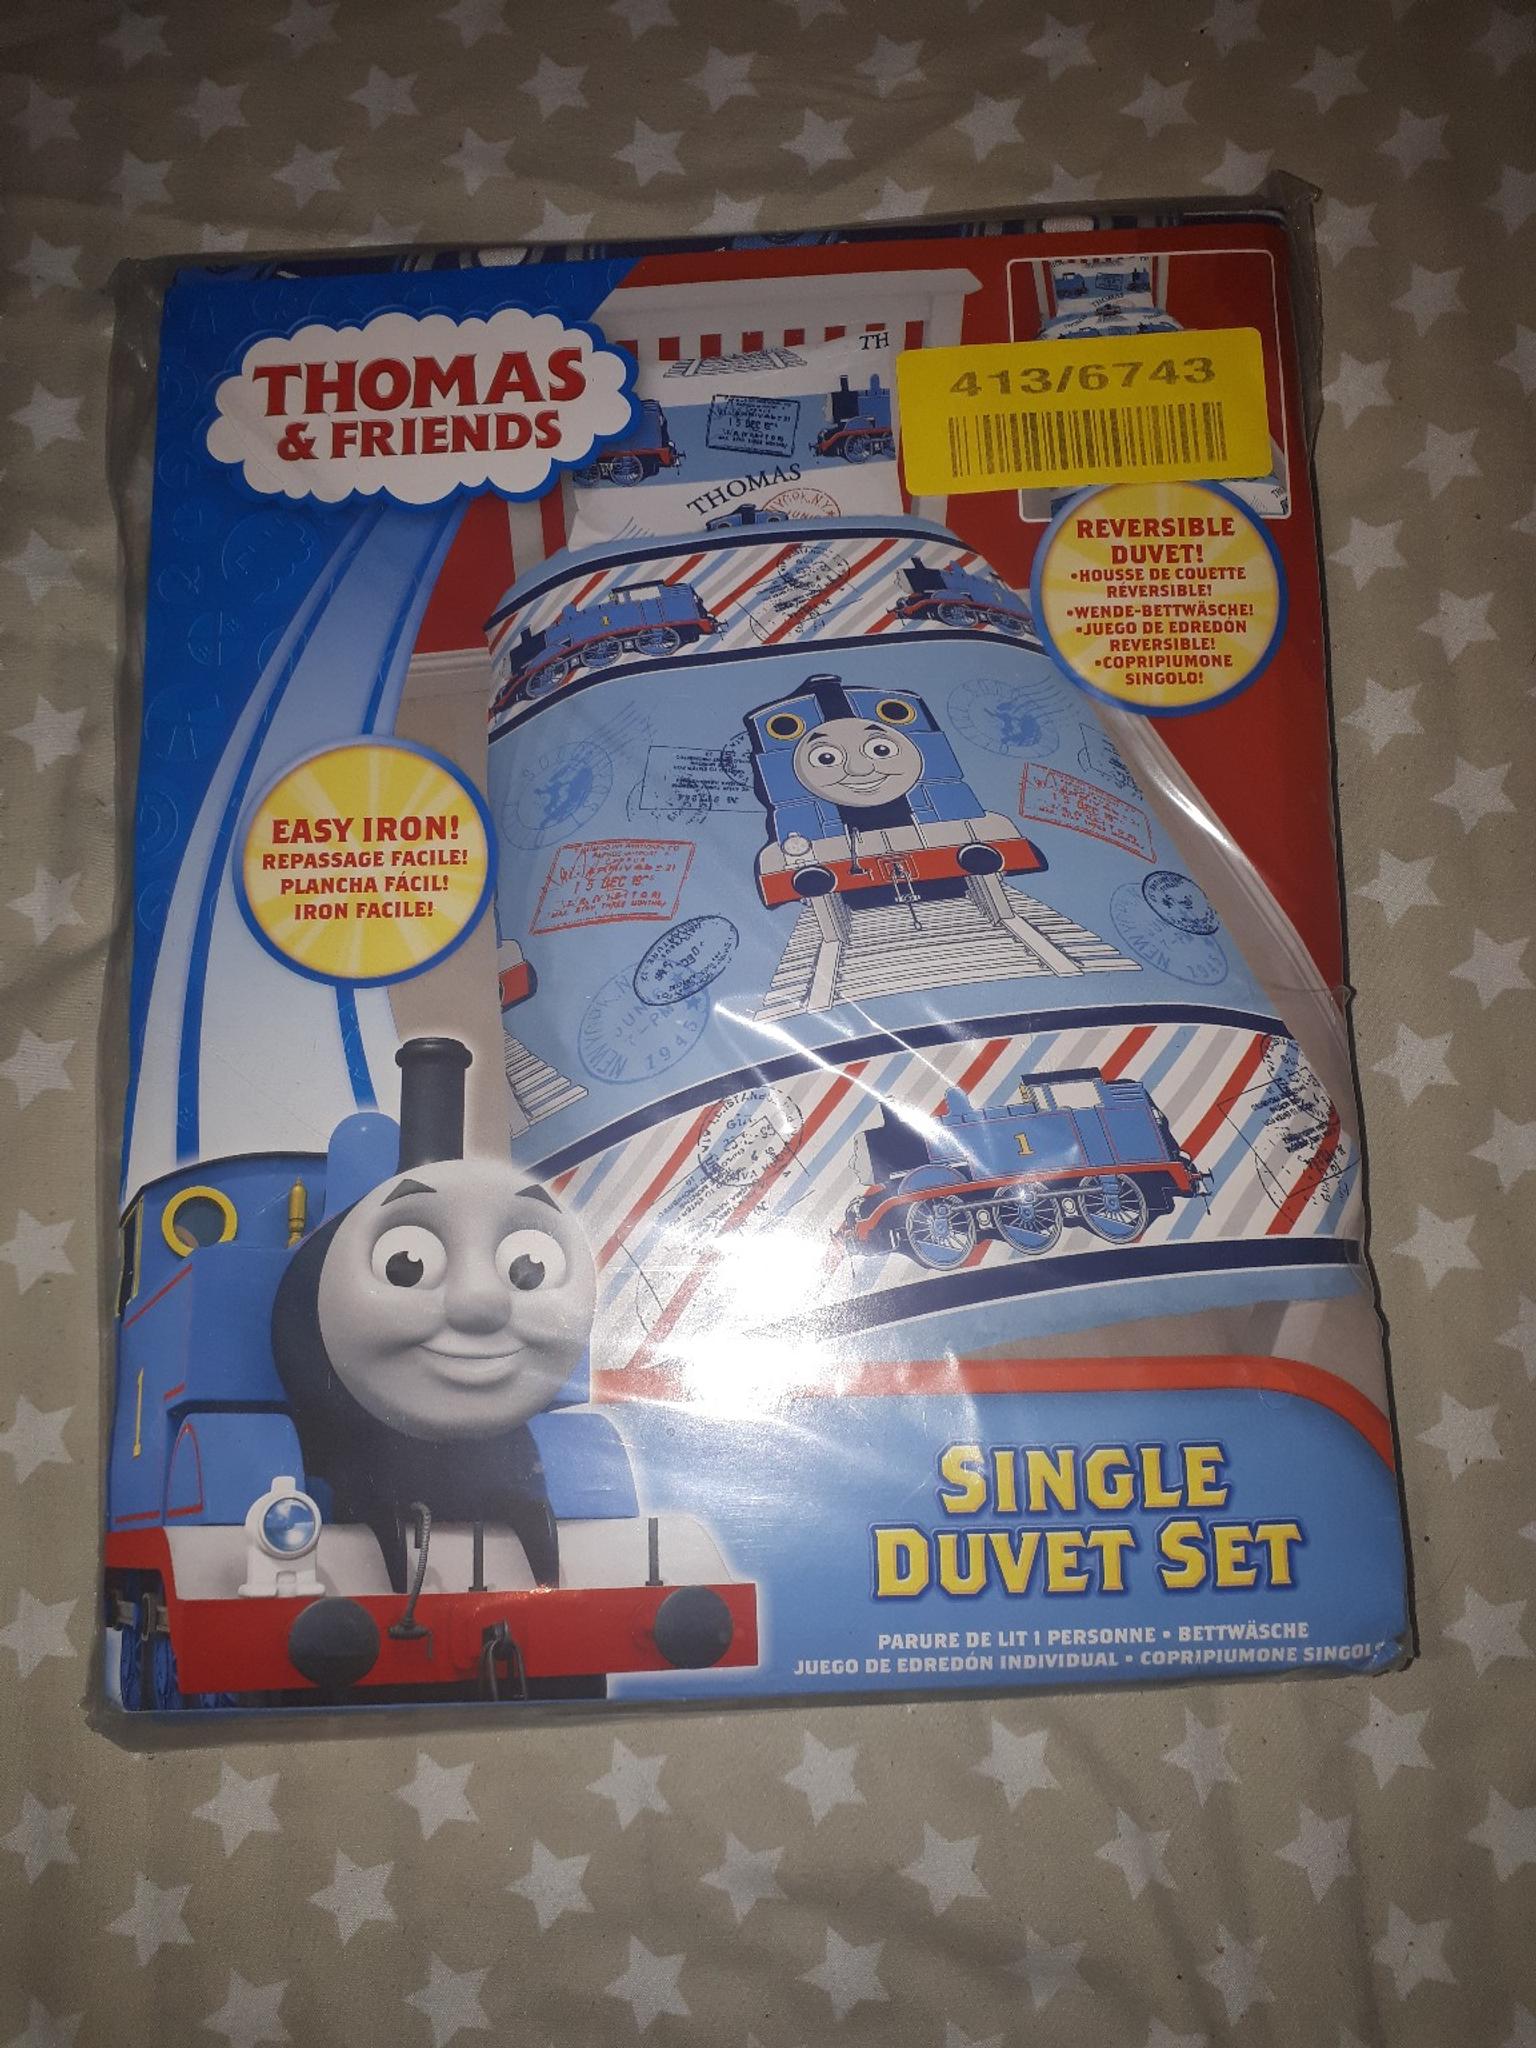 Thomas The Tank Engine Duvet Cover In St Helens For 5 00 For Sale